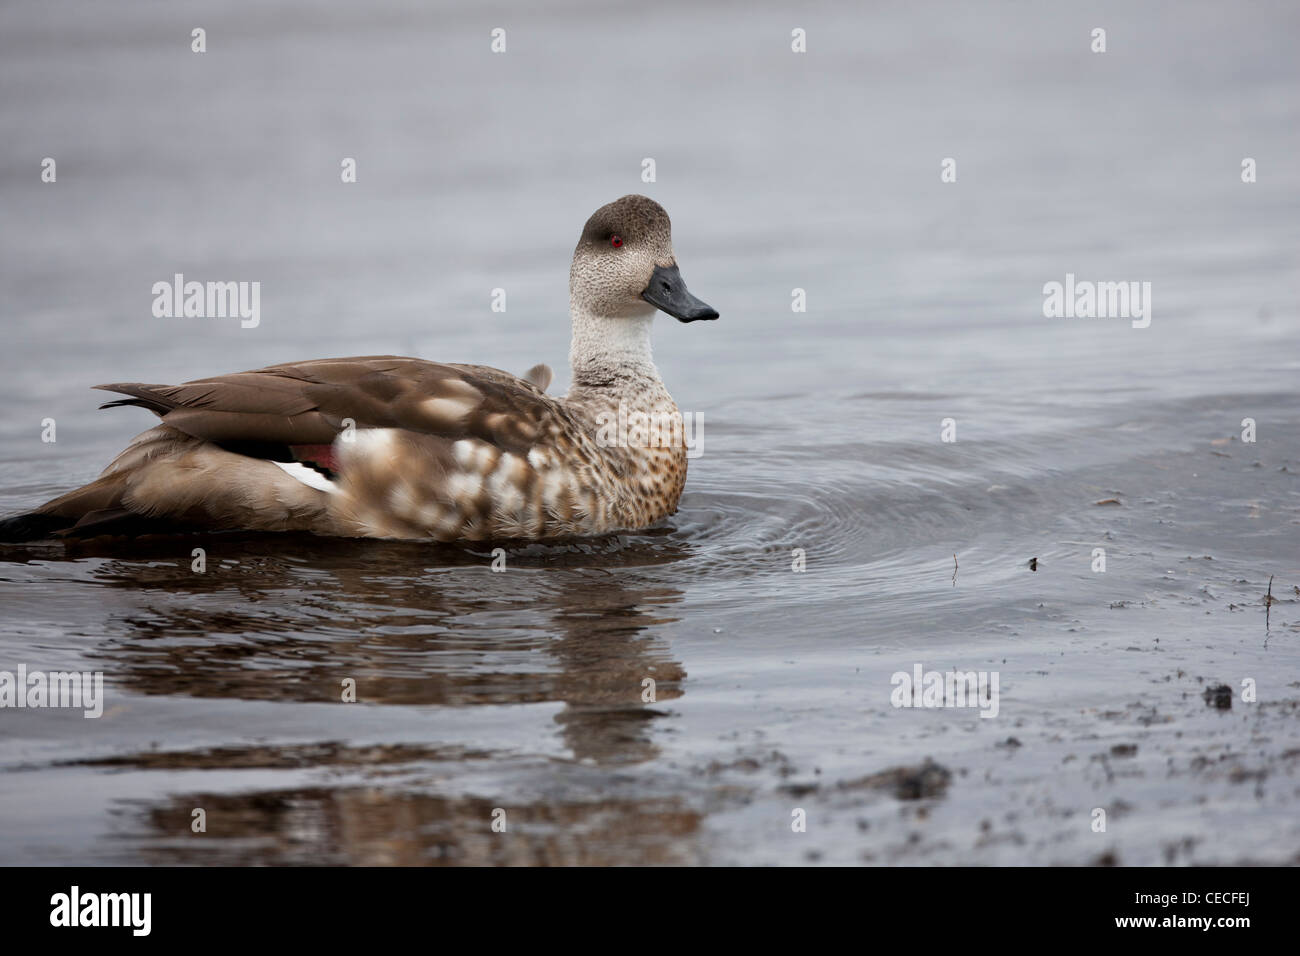 Crested Duck (Lophonetta specularioides specularioides) nuoto in Ushuaia, Tierra del Fuego, Argentina Foto Stock